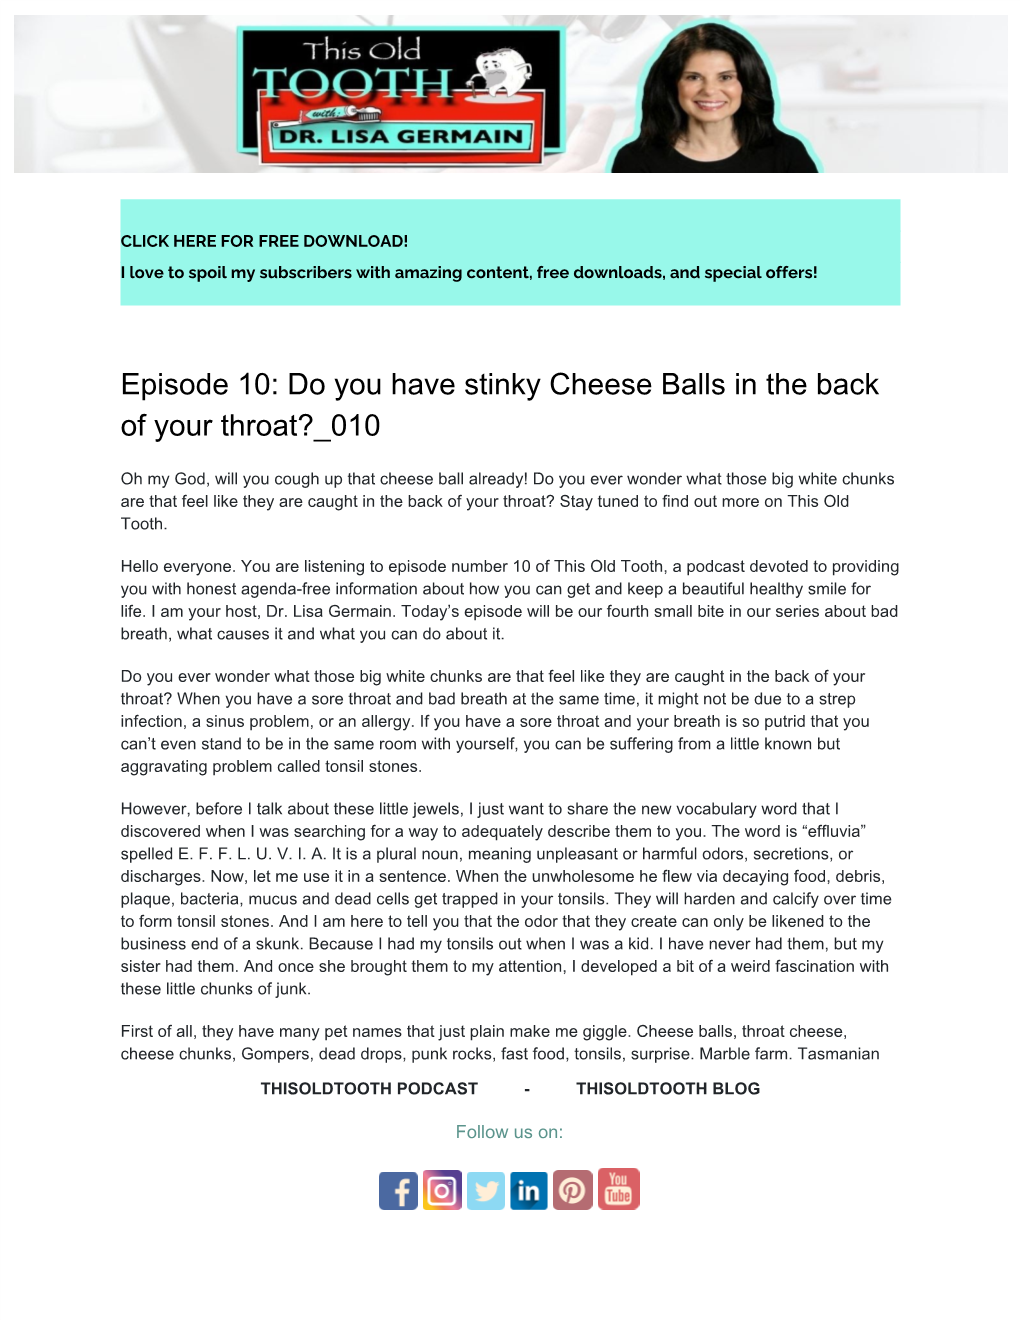 Do You Have Stinky Cheese Balls in the Back of Your Throat? 010